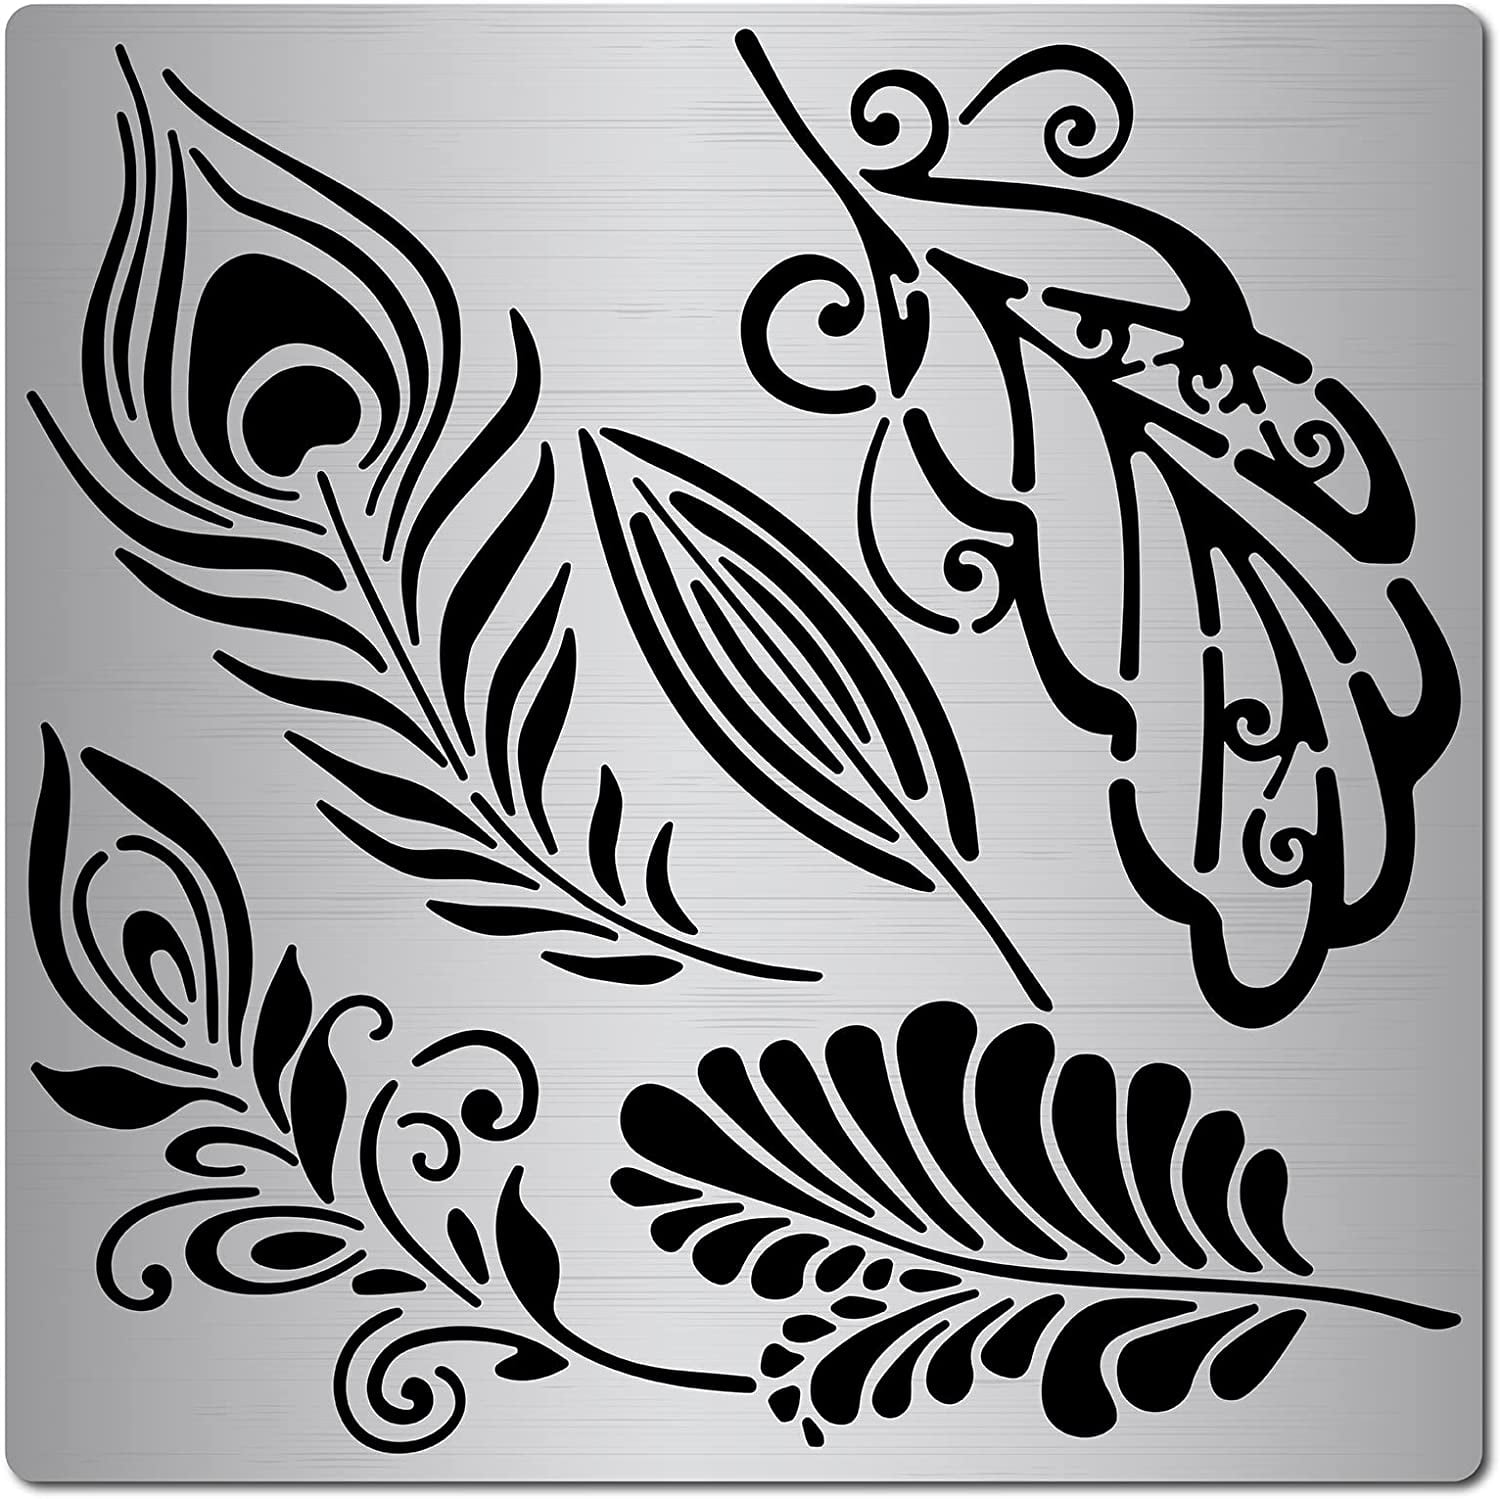 Metal Journal Stencils Floral Vine Stainless Steel Stencil Templates Tool  For Painting Wood Burning Carving Pyrography